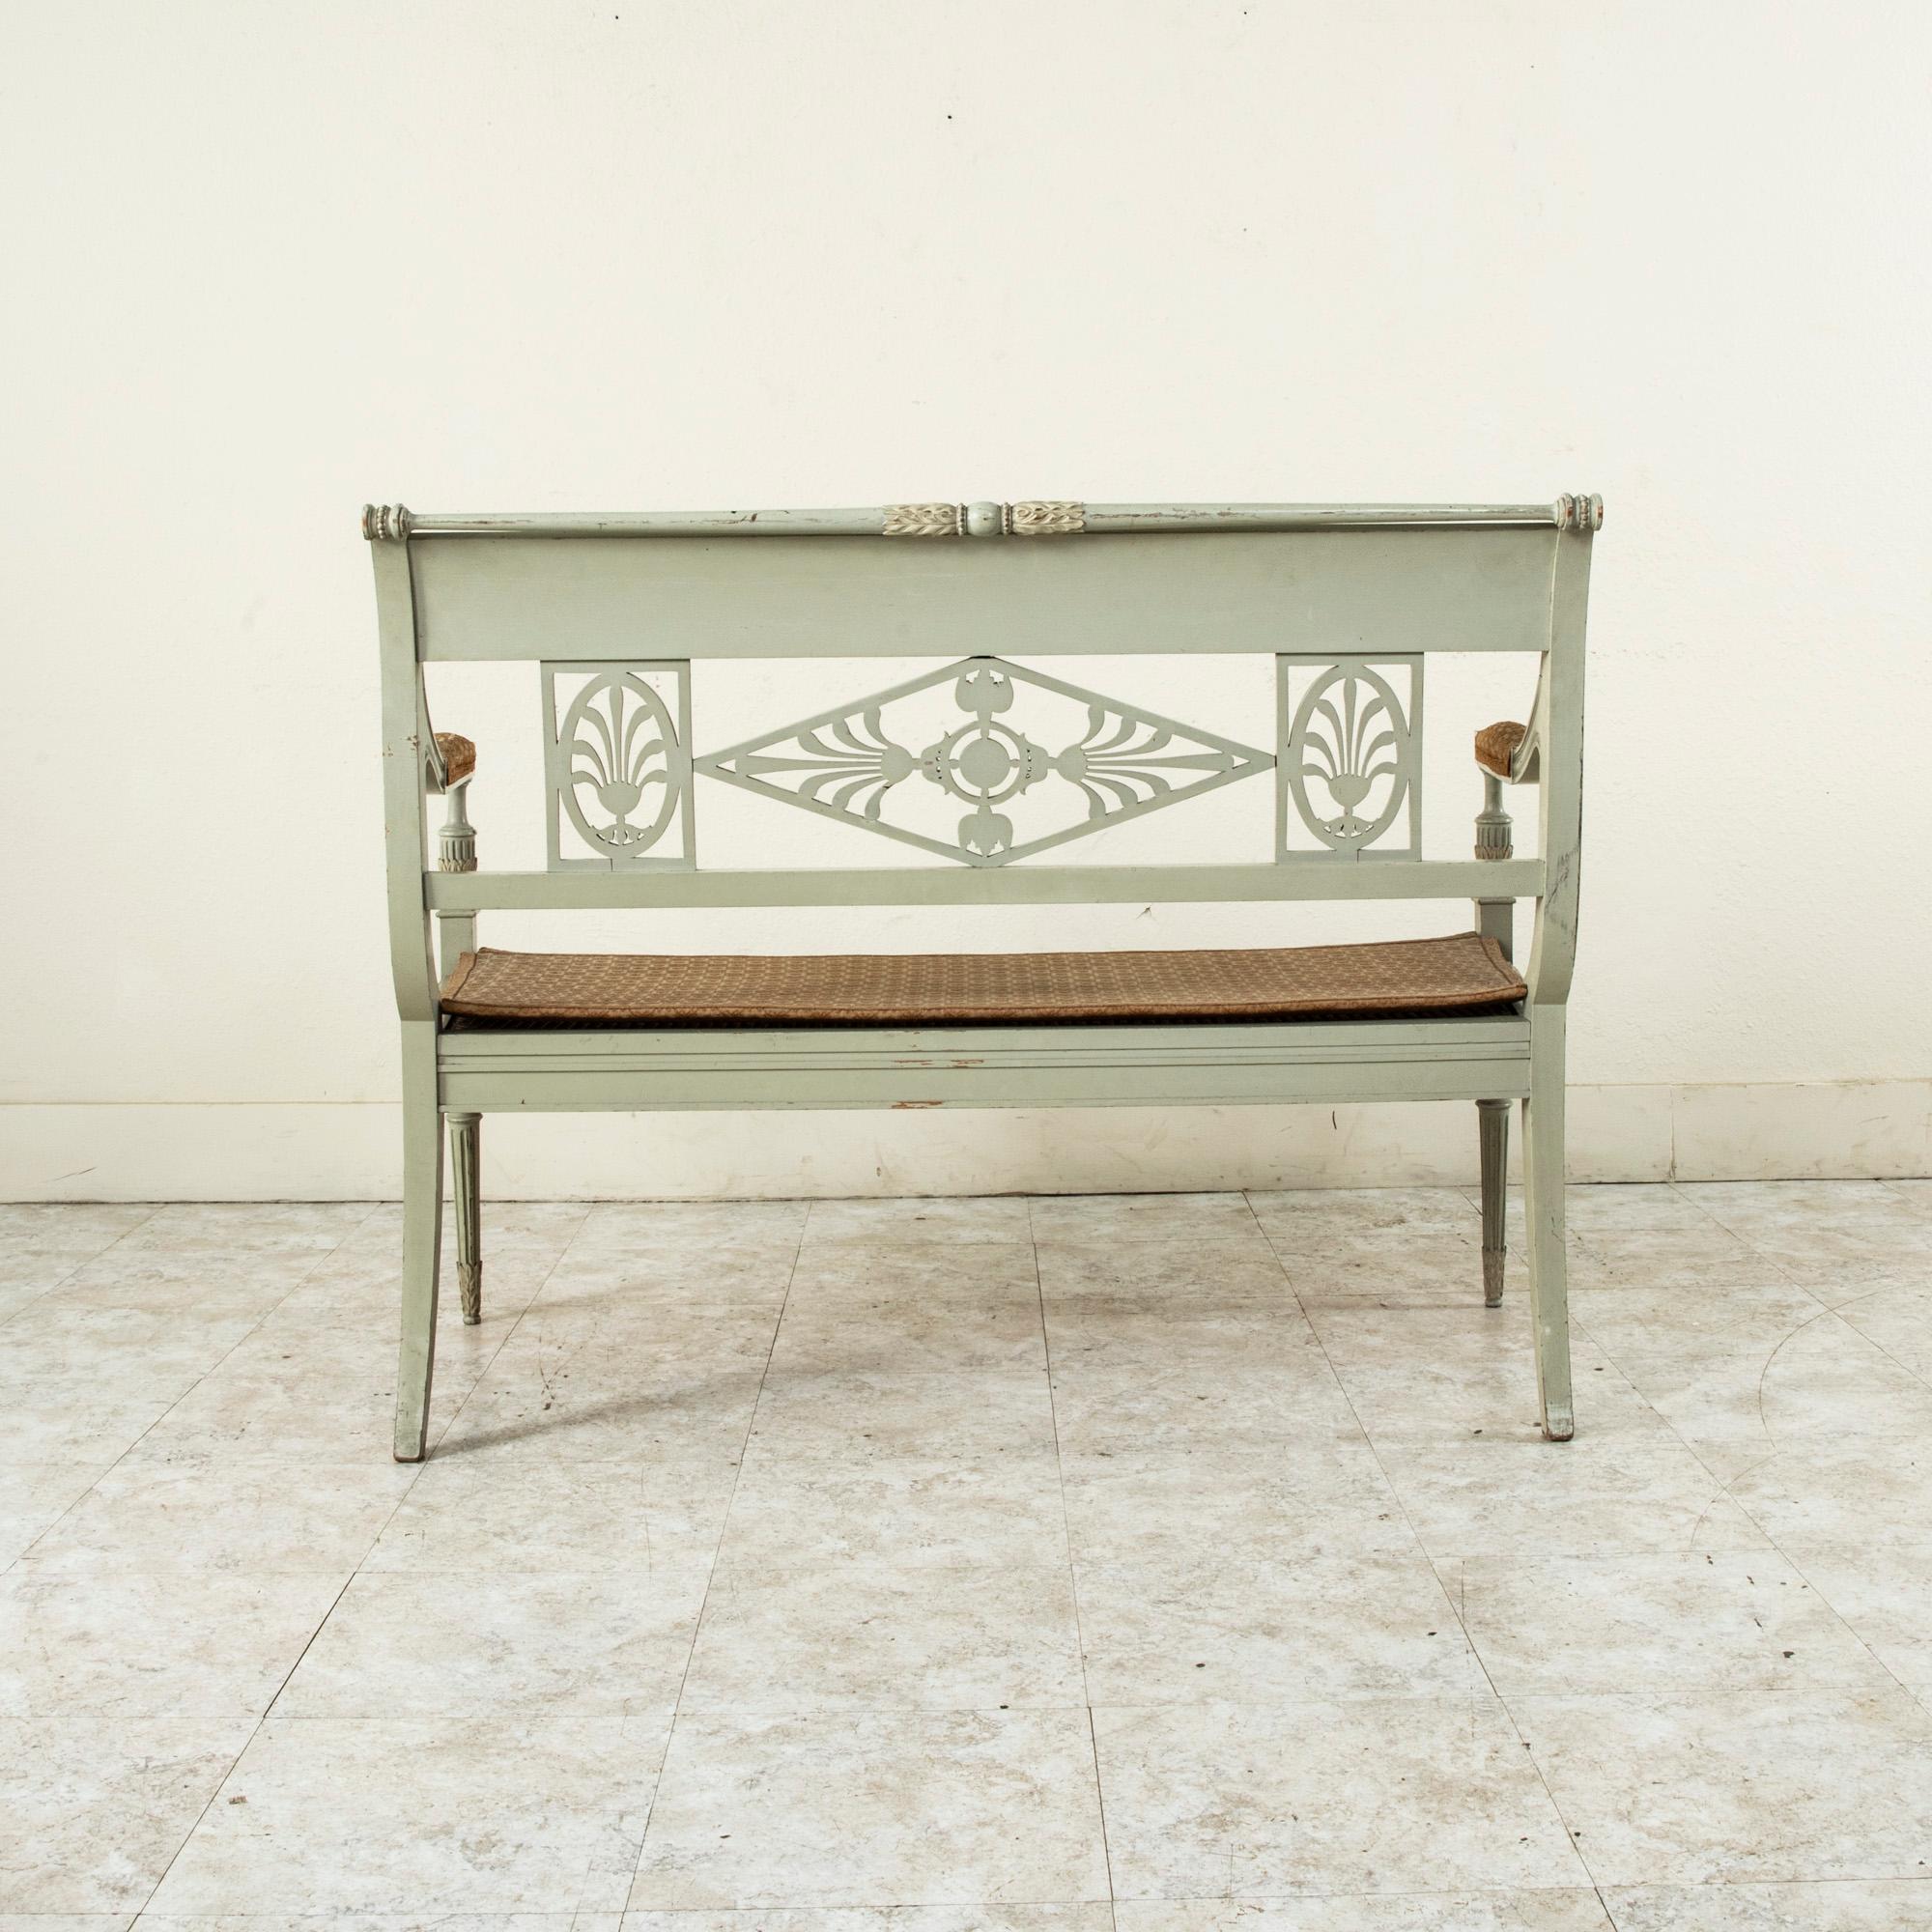 Early 20th Century French Directoire Style Painted Ash Banquette, Settee For Sale 1